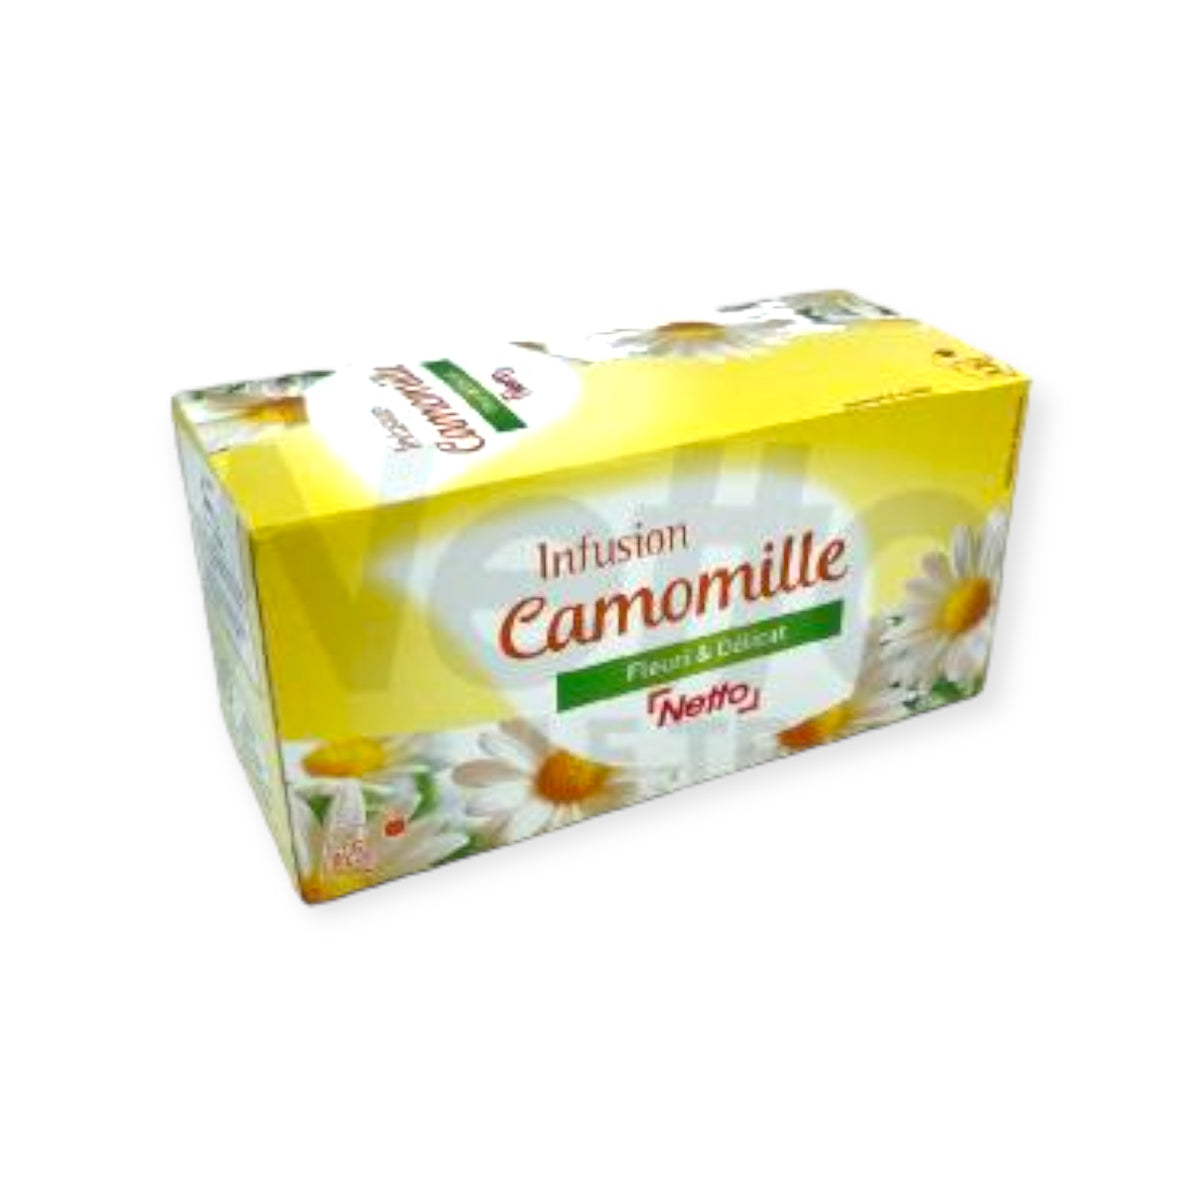 NETTO Infusion camomille 30g